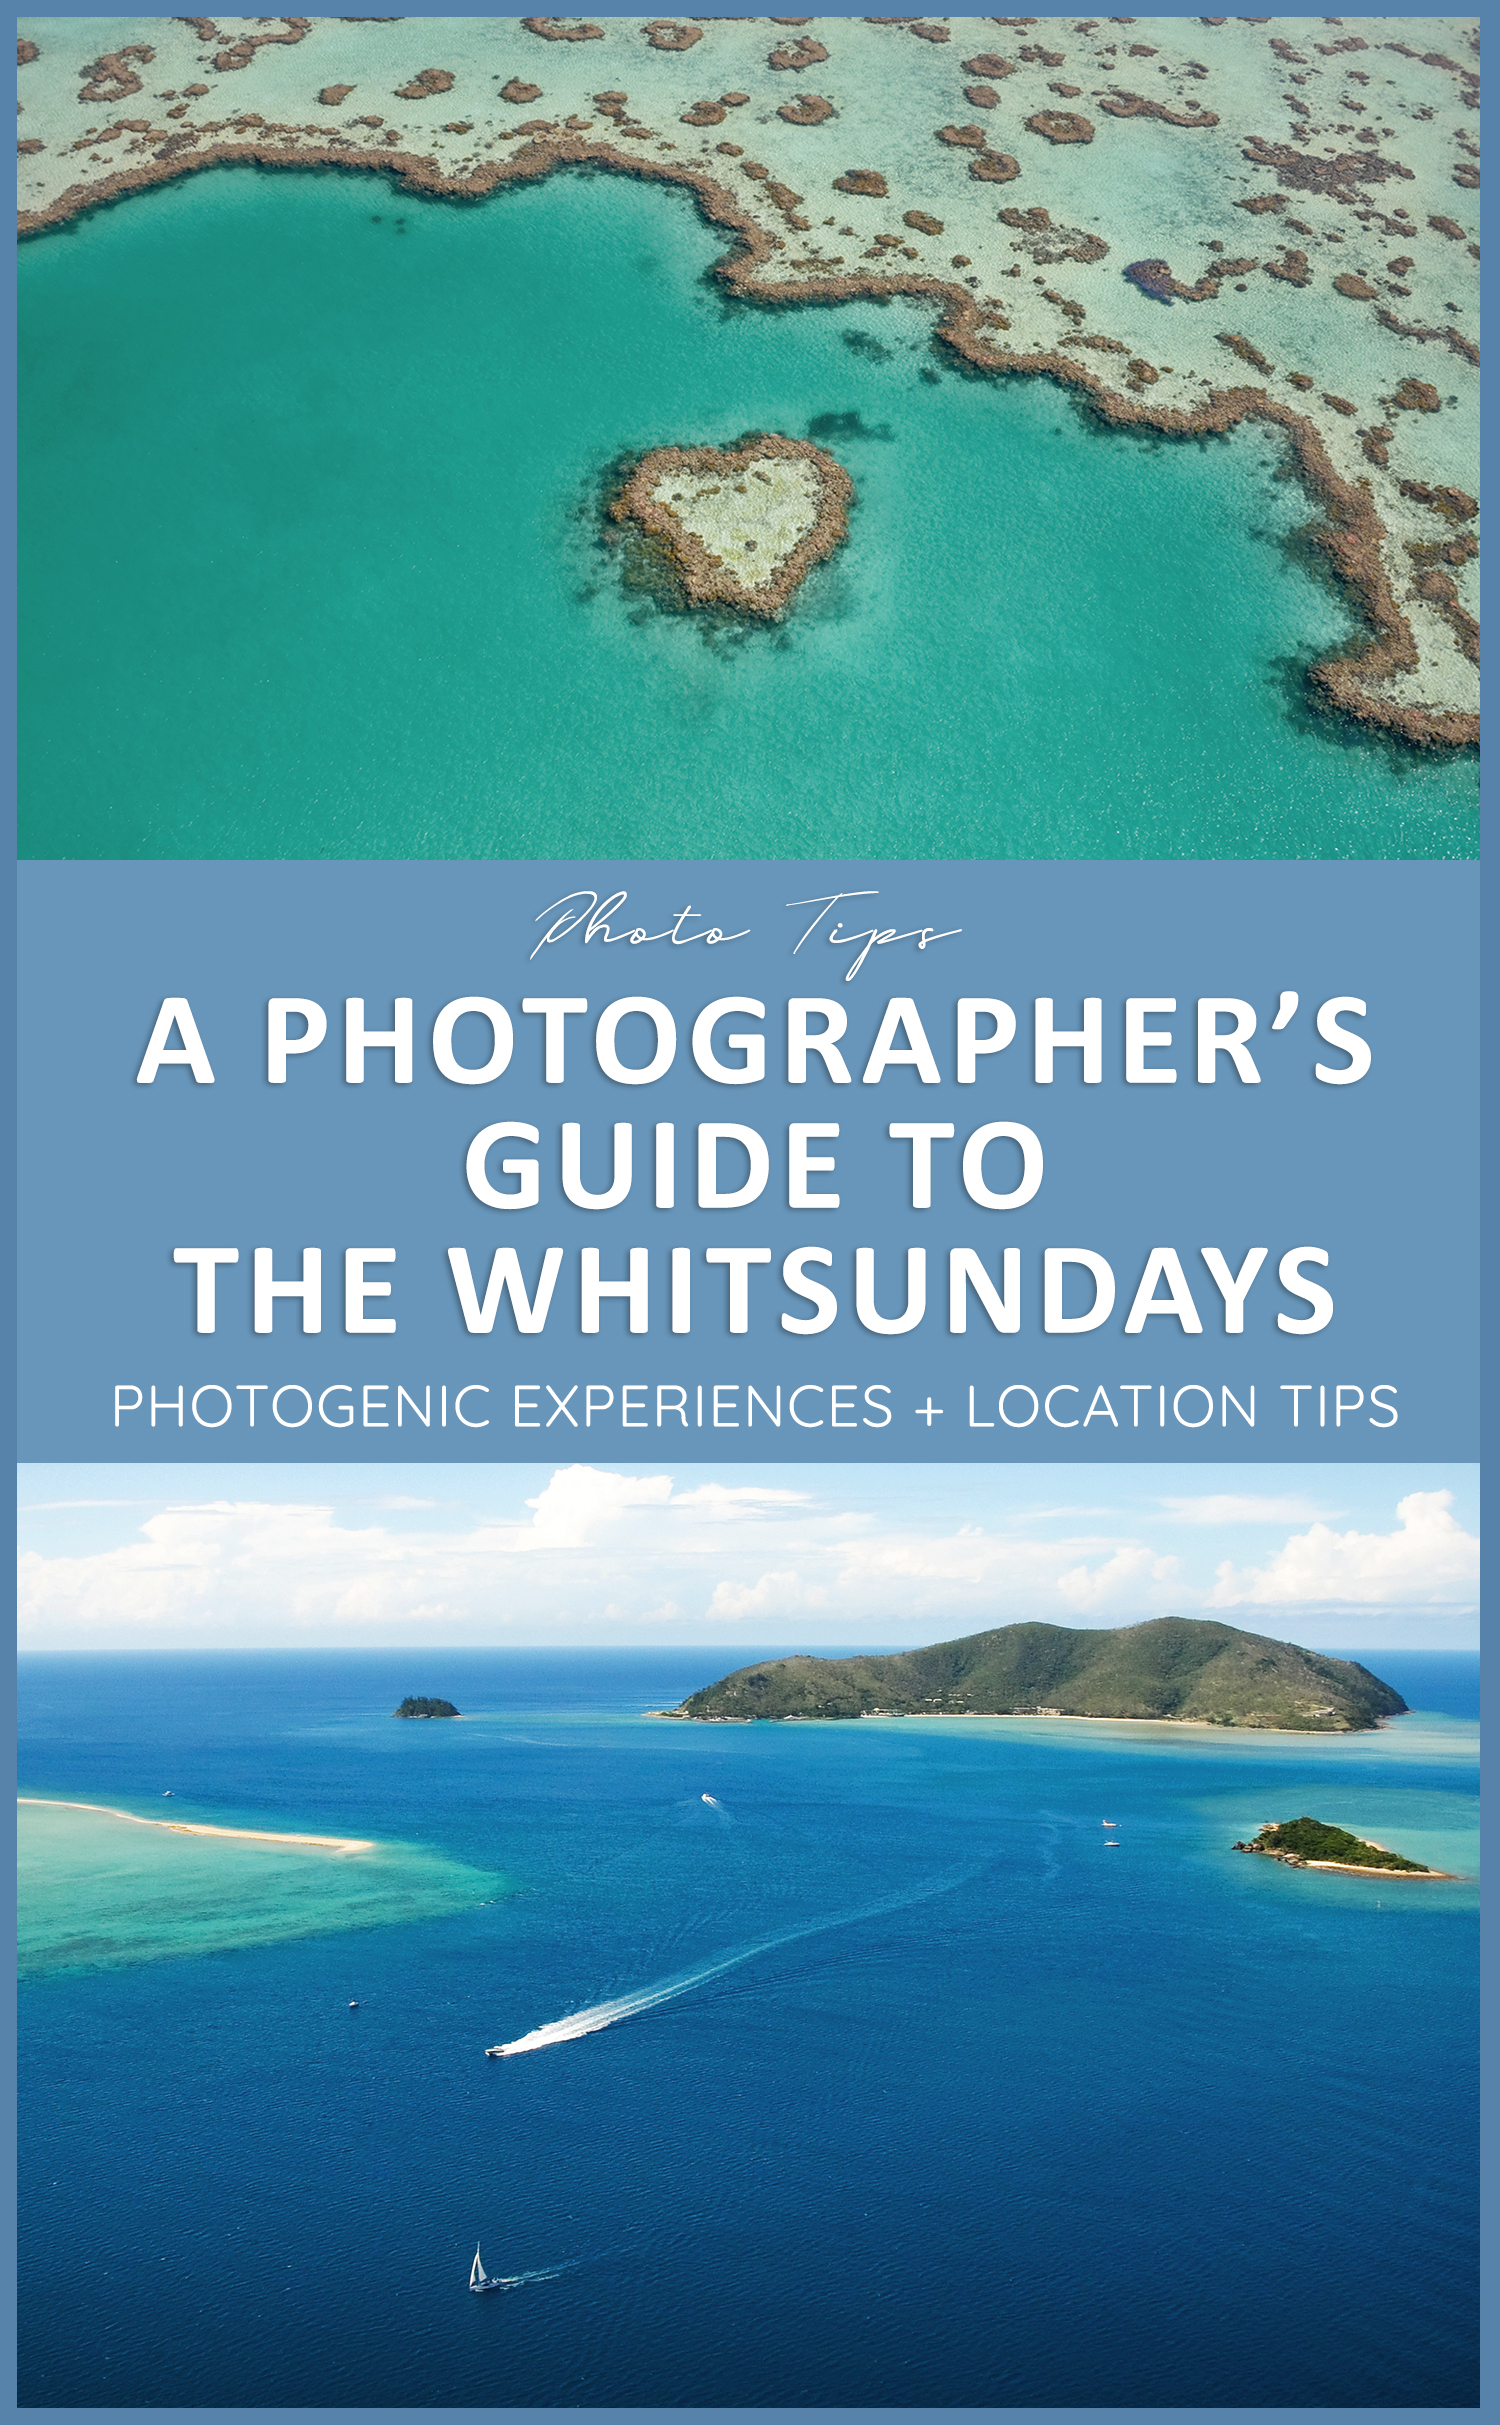 The Whitsundays - Hamilton Island, Airlie Beach and Great Barrier Reef location guide